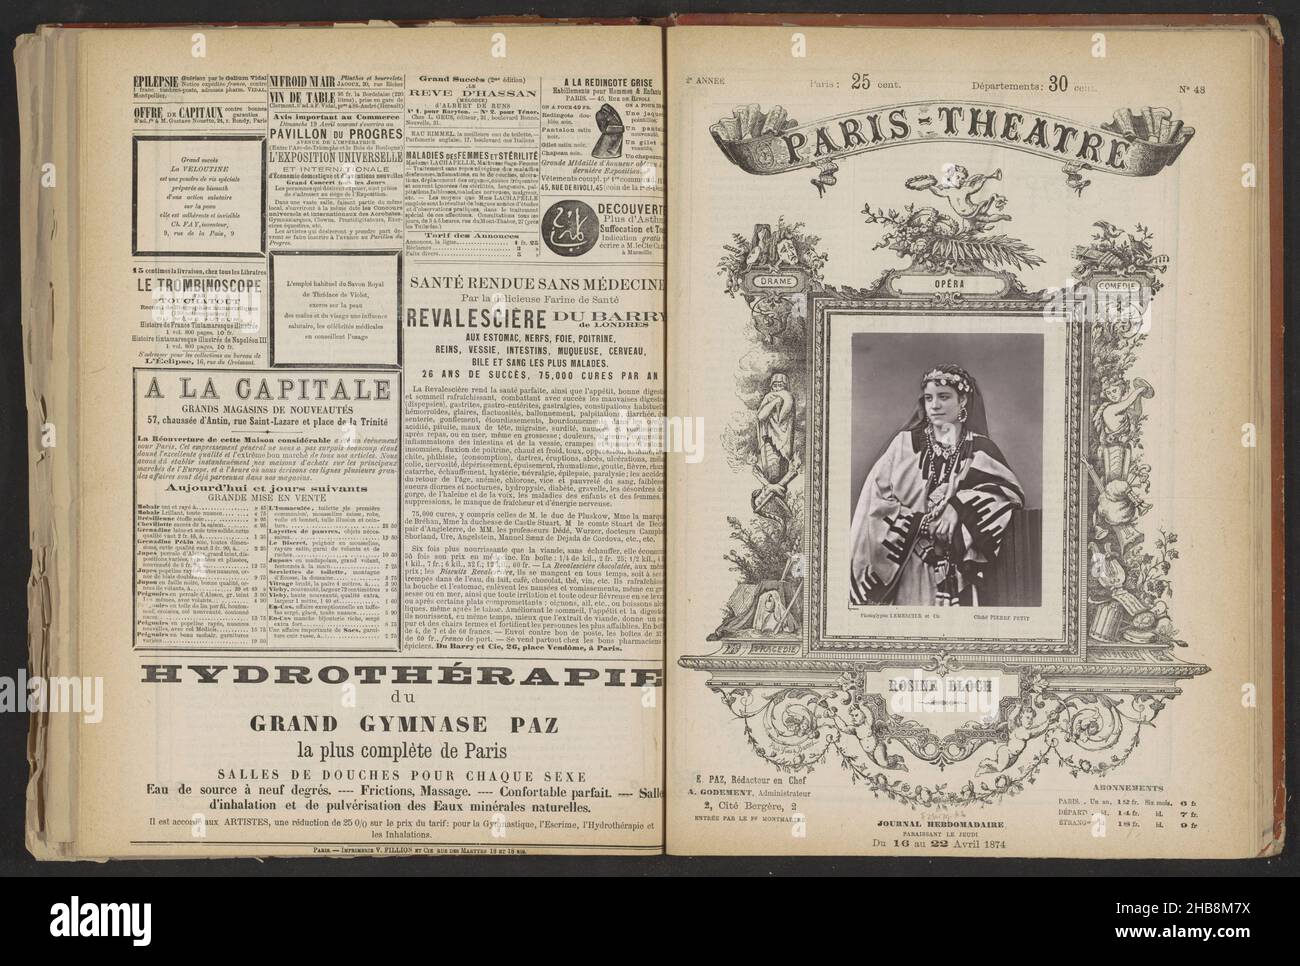 Portrait of Rosine Bloch as Azucena in Il Trovatore, Rosine Bloch (title on object), Pierre Petit (mentioned on object), Lemercier & Cie. (possibly), France, c. 1869 - before 16-Apr-1874, paper, height 124 mm × width 87 mm Stock Photo